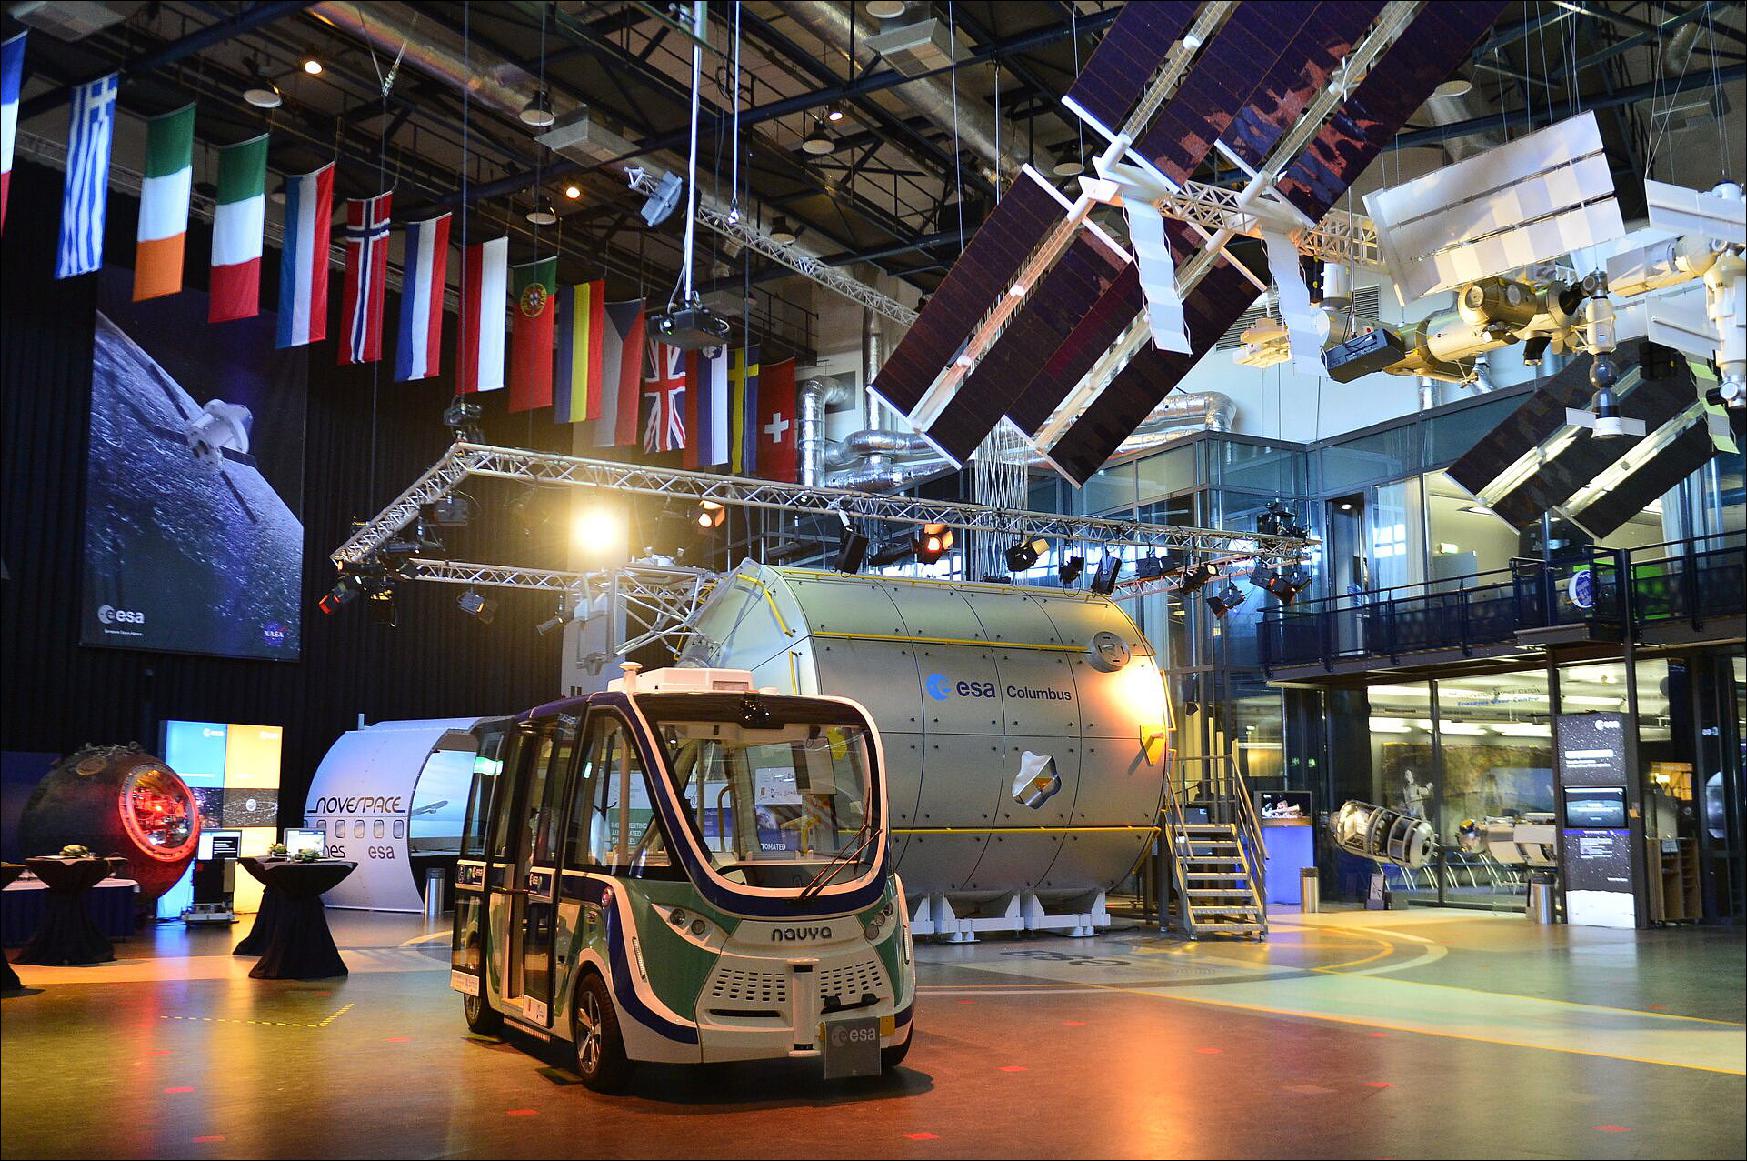 Figure 2: Driving into the future. A highly autonomous self-driving shuttle has entered service at ESA/ESTEC. Its official inauguration took place on Tuesday (27 October 2020), when it was assigned a suitably spacey name – 'Orbiter' – chosen through an employee competition (image credit: ESA, L. Cervantes)